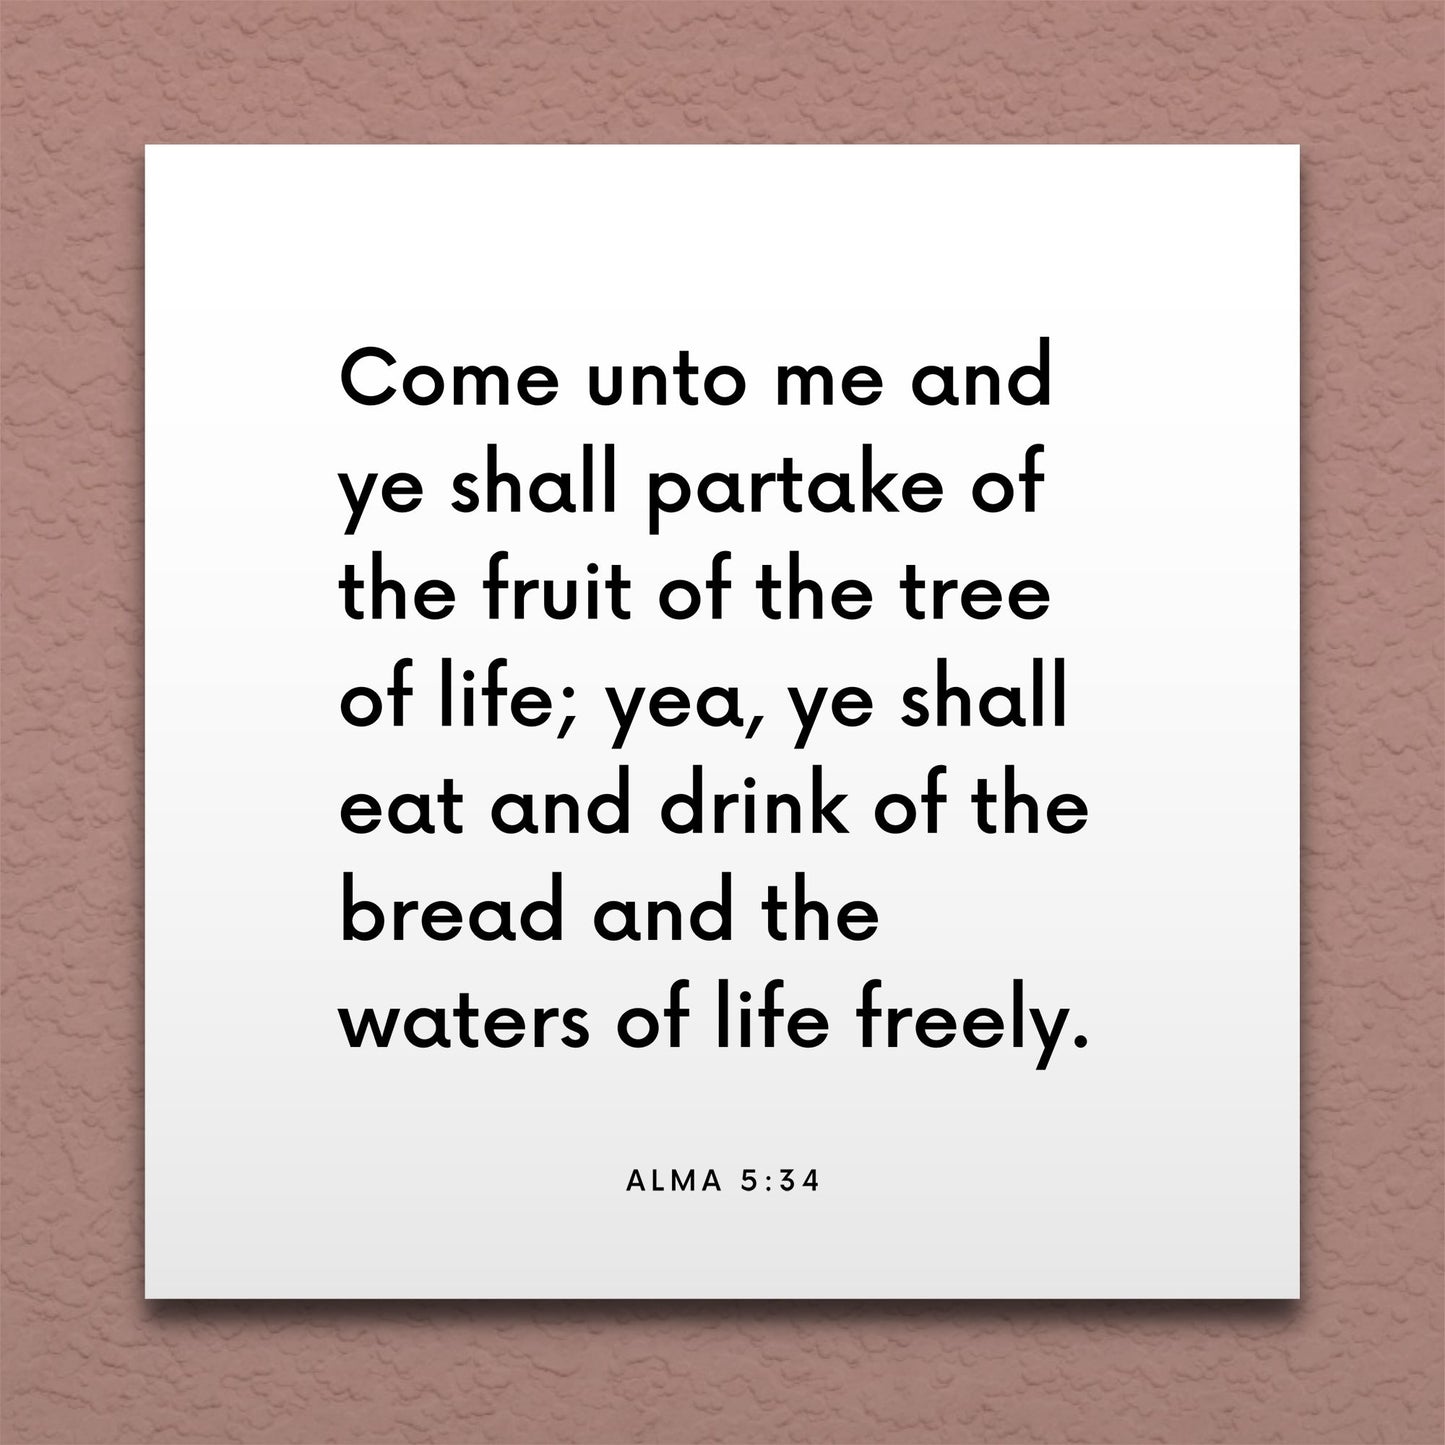 Wall-mounted scripture tile for Alma 5:34 - "Eat and drink of the bread and the waters of life freely"